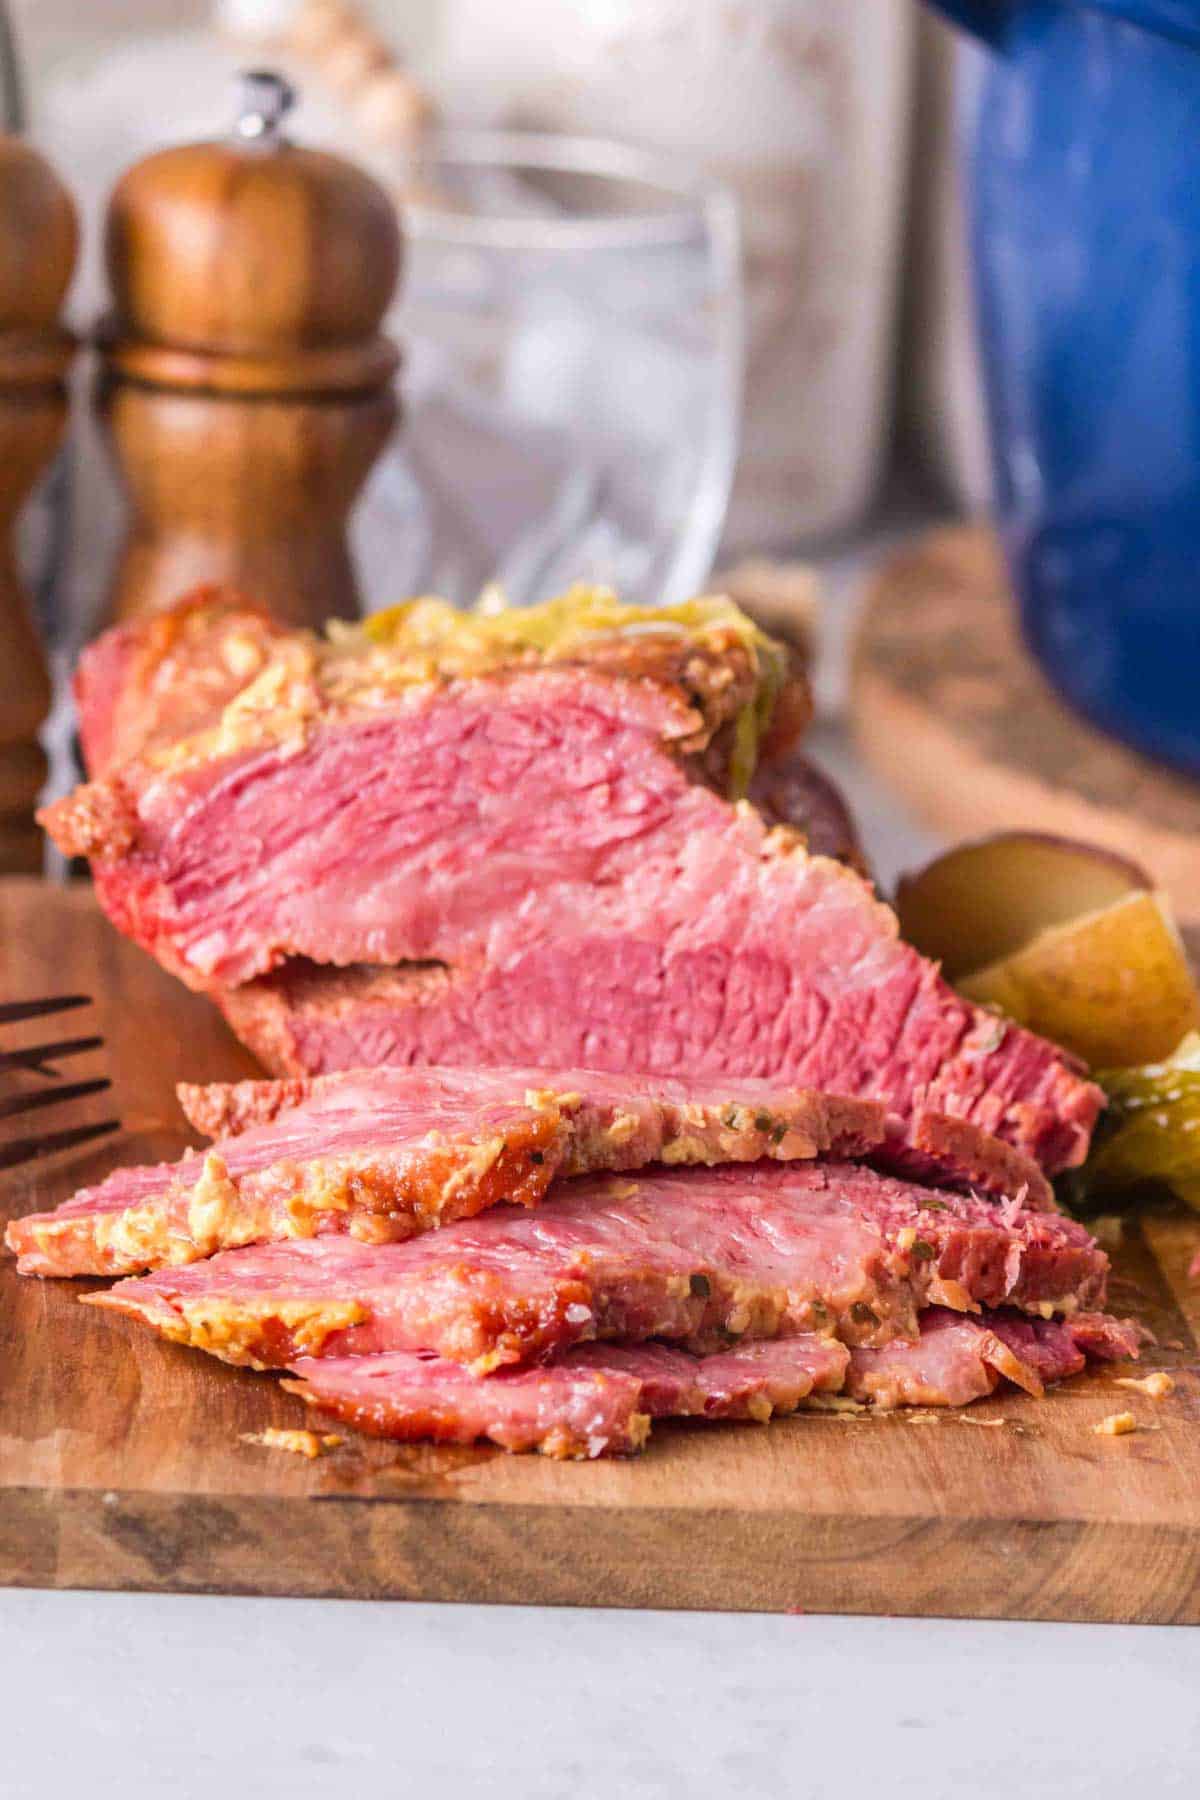 Pink slices of corned beef rest on a wooden cutting board.